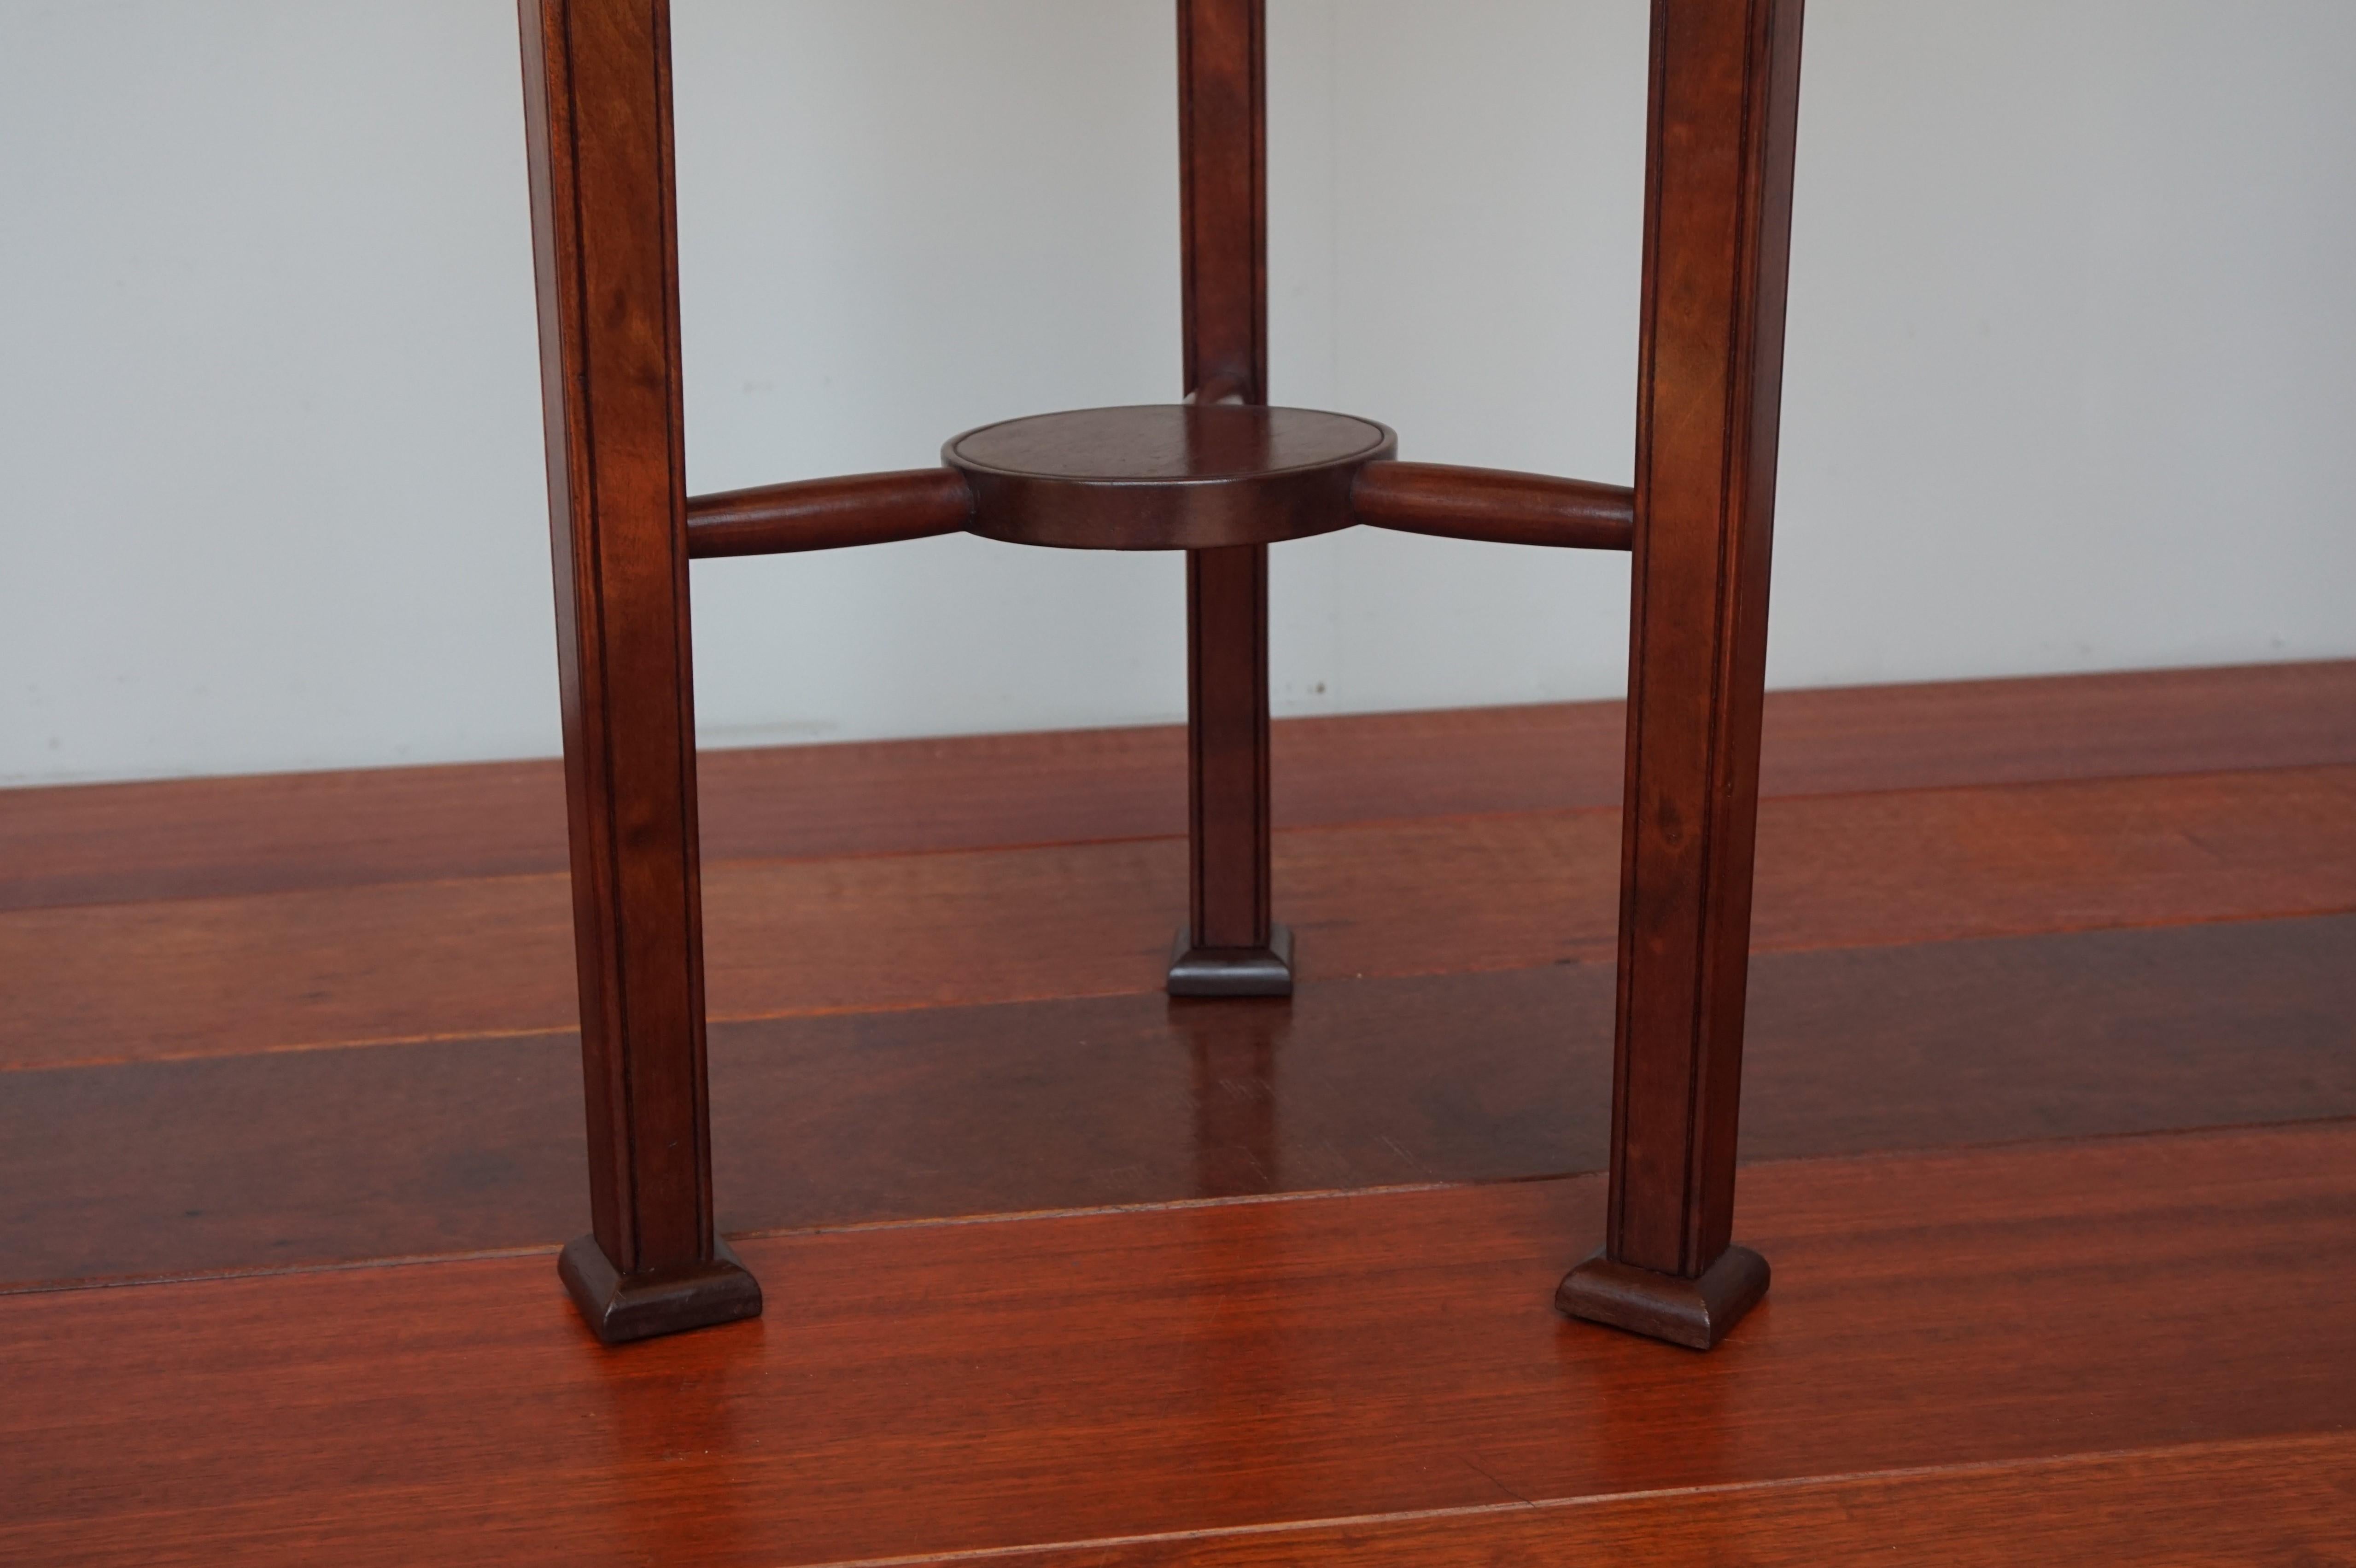 Wonderful Solid Mahogany Art Deco Pedestal Table and Sculpture Stand circa 1920 6